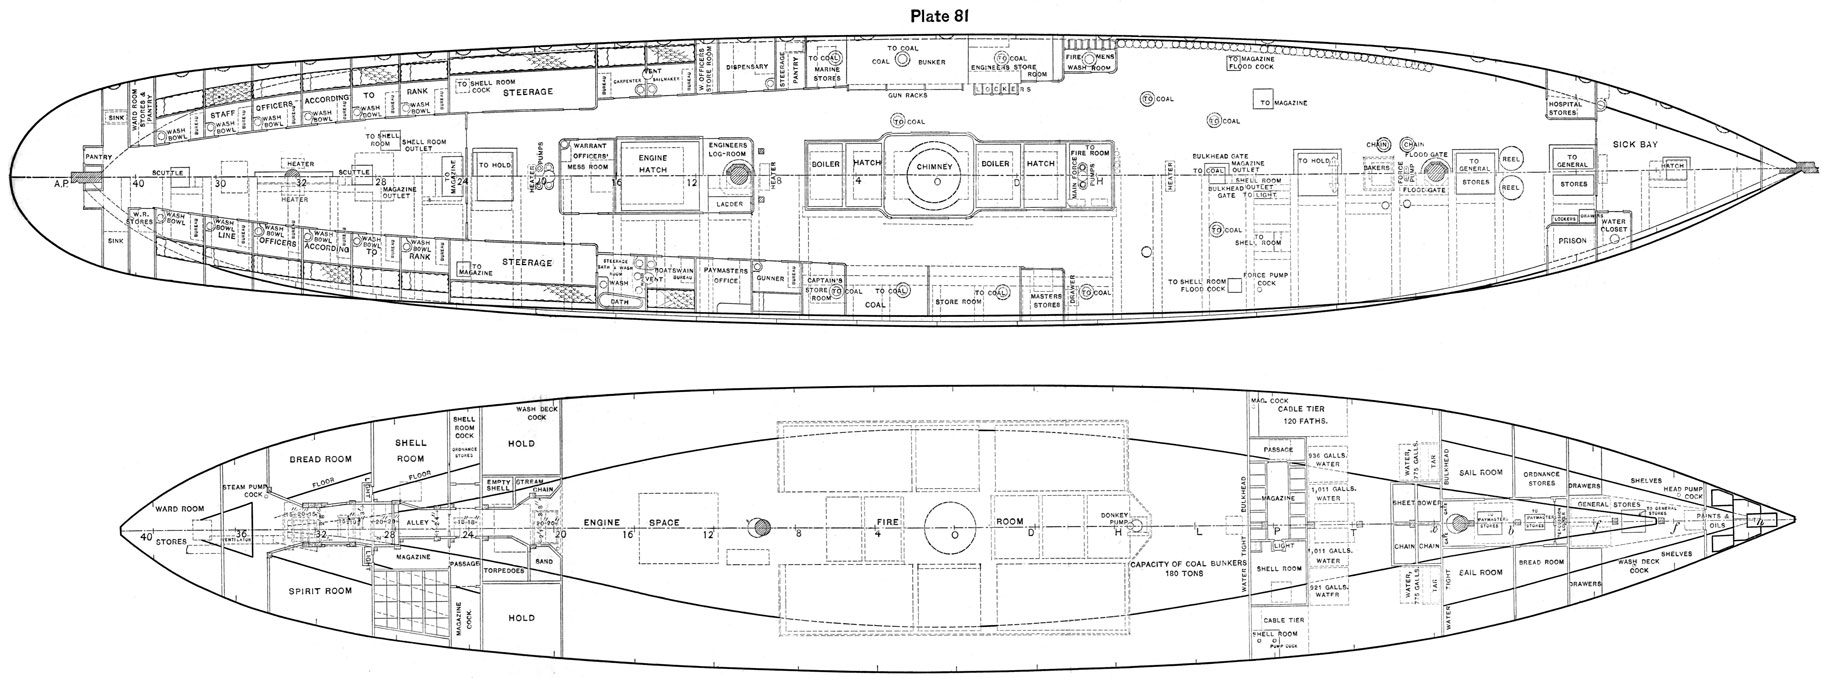 Plate 81, Plan view of ship showing use of all spaces including holds.